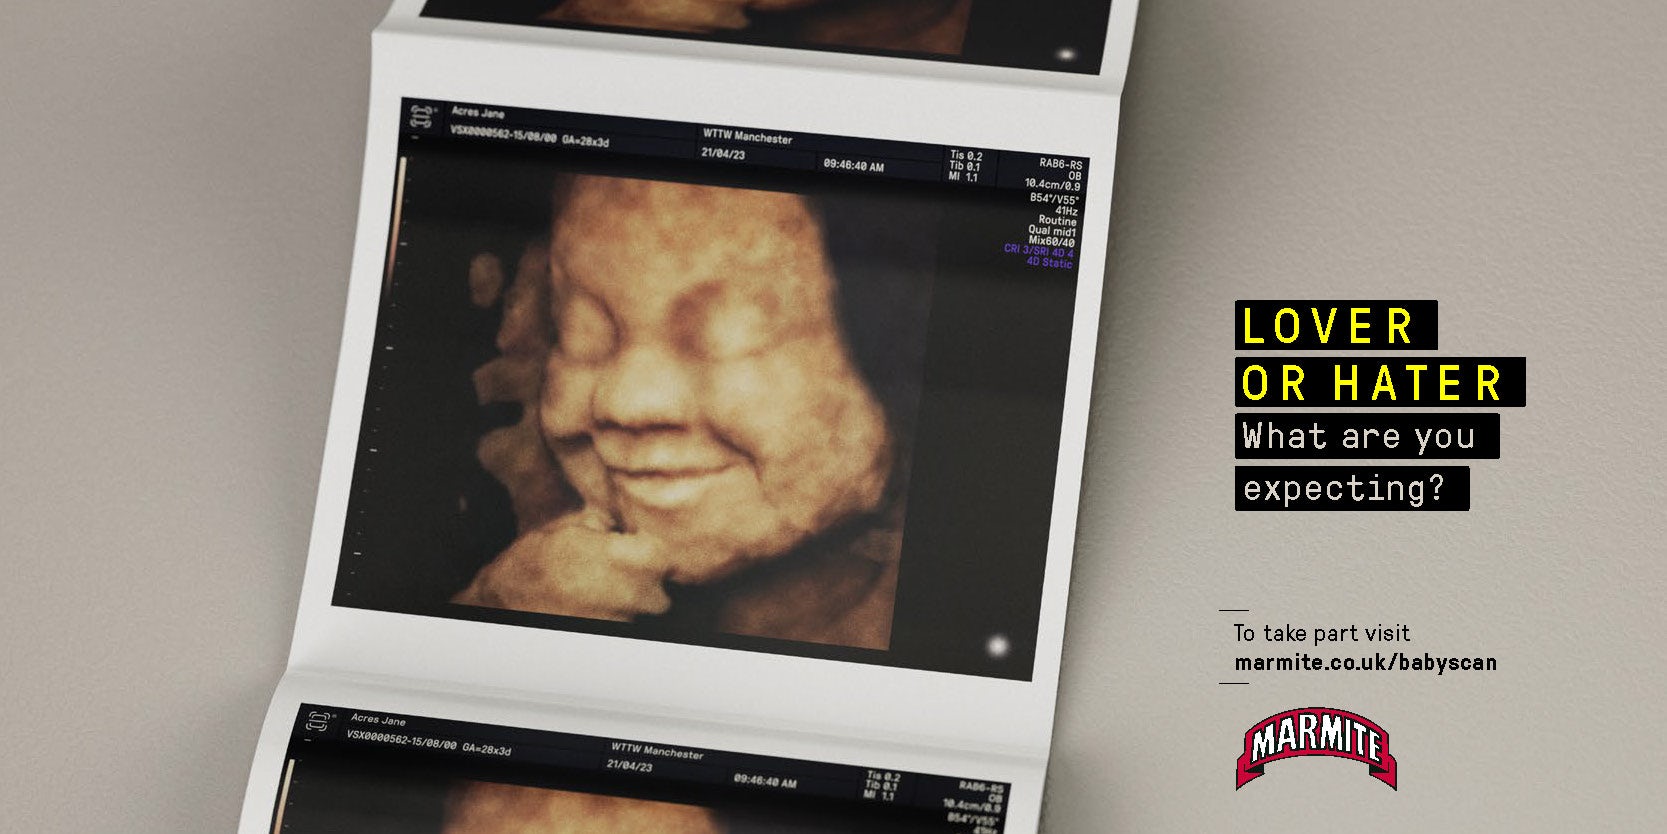 Image shows a Marmite ad featuring an ultrasound scan of a foetus appearing to stroke its chin